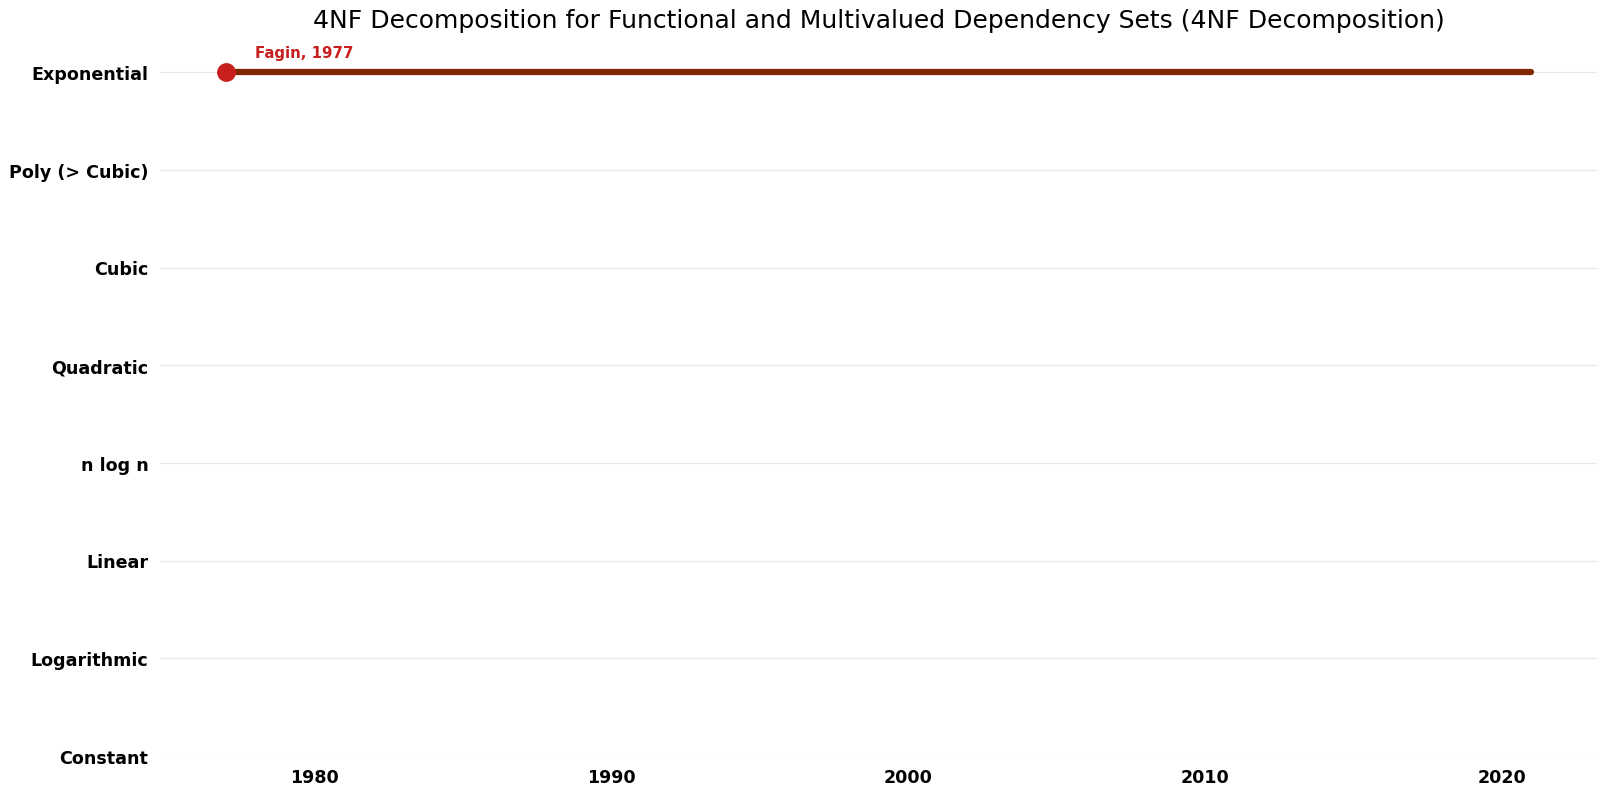 4NF Decomposition - 4NF Decomposition for Functional and Multivalued Dependency Sets - Time.png